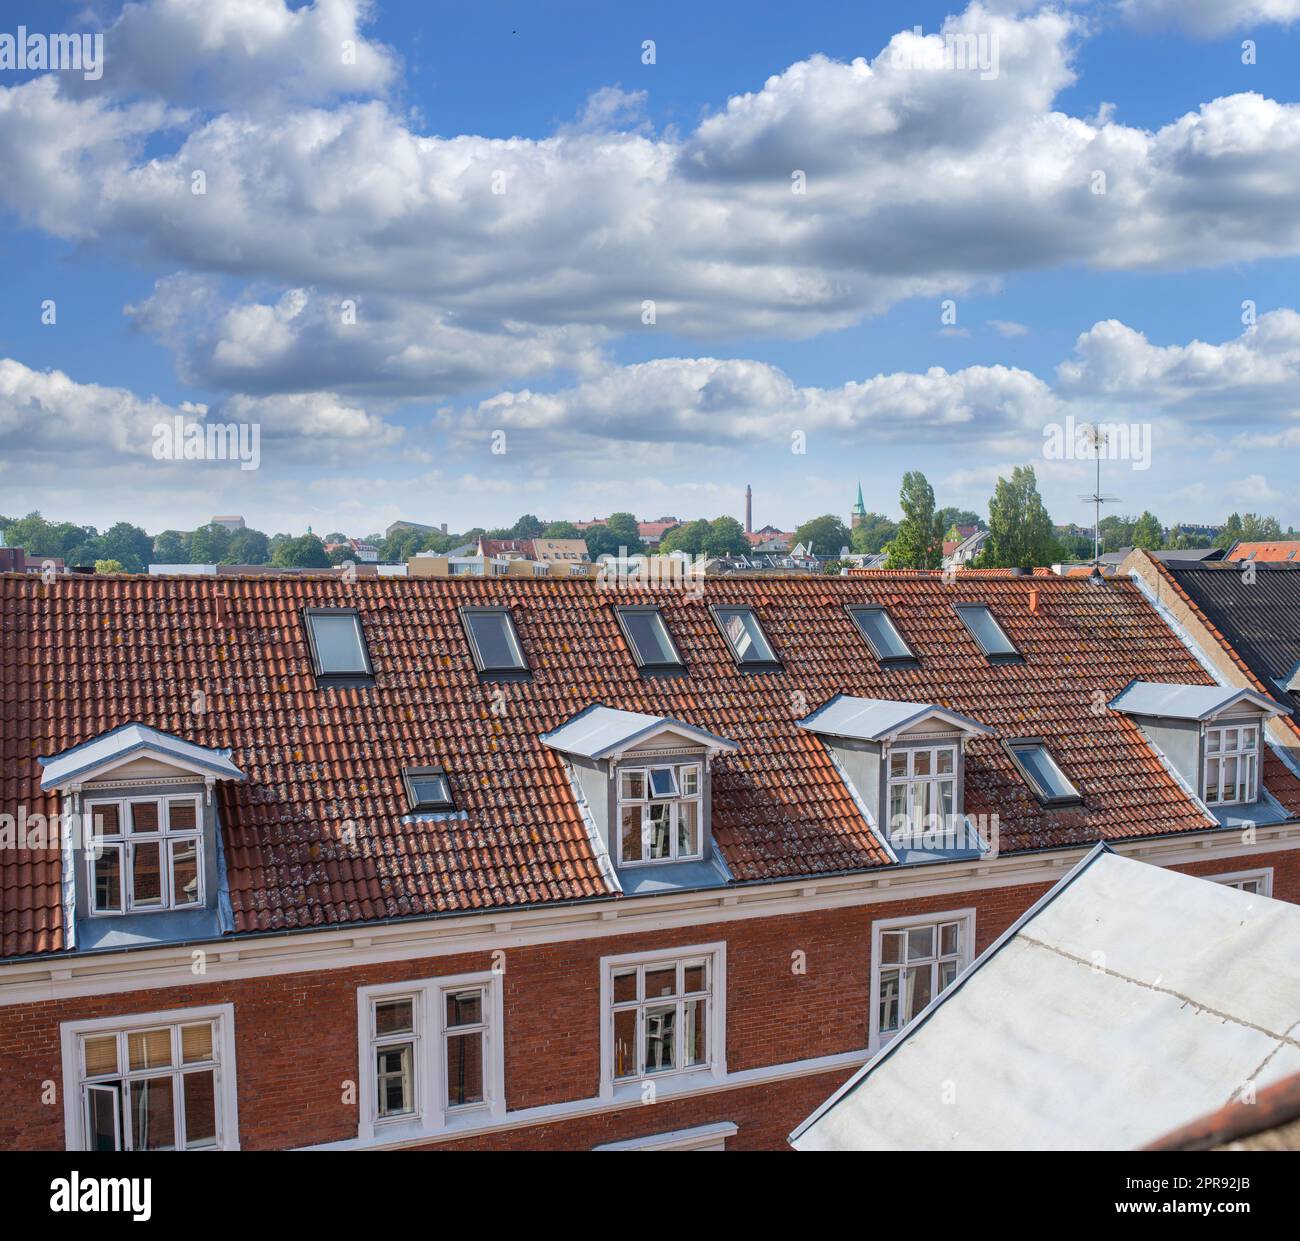 Oldwindow. Rooftop view of buildings in a town with glass windows and frames under a cloudy blue sky. Beautiful landscape architecture with clouds surrounding a suburban urban environment. Stock Photo